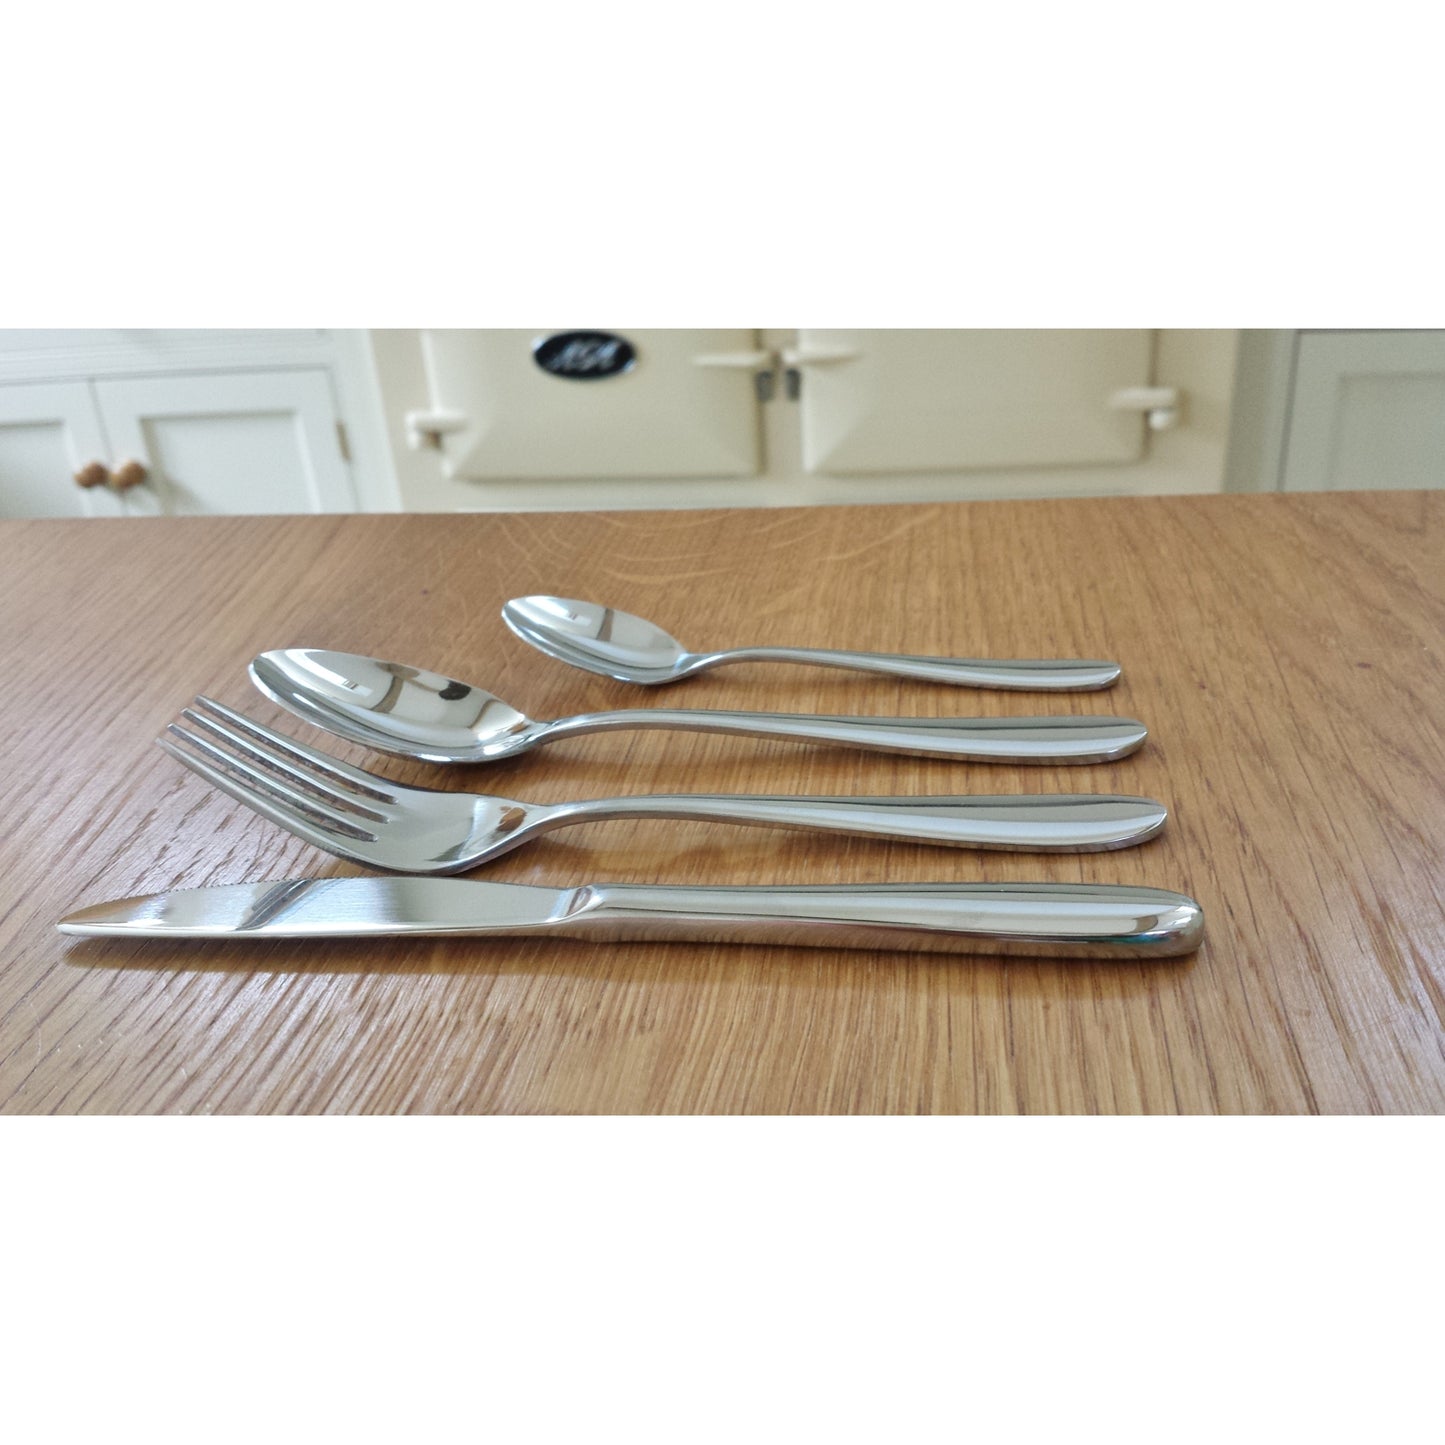 Tray with 6 sets of Child's Cutlery